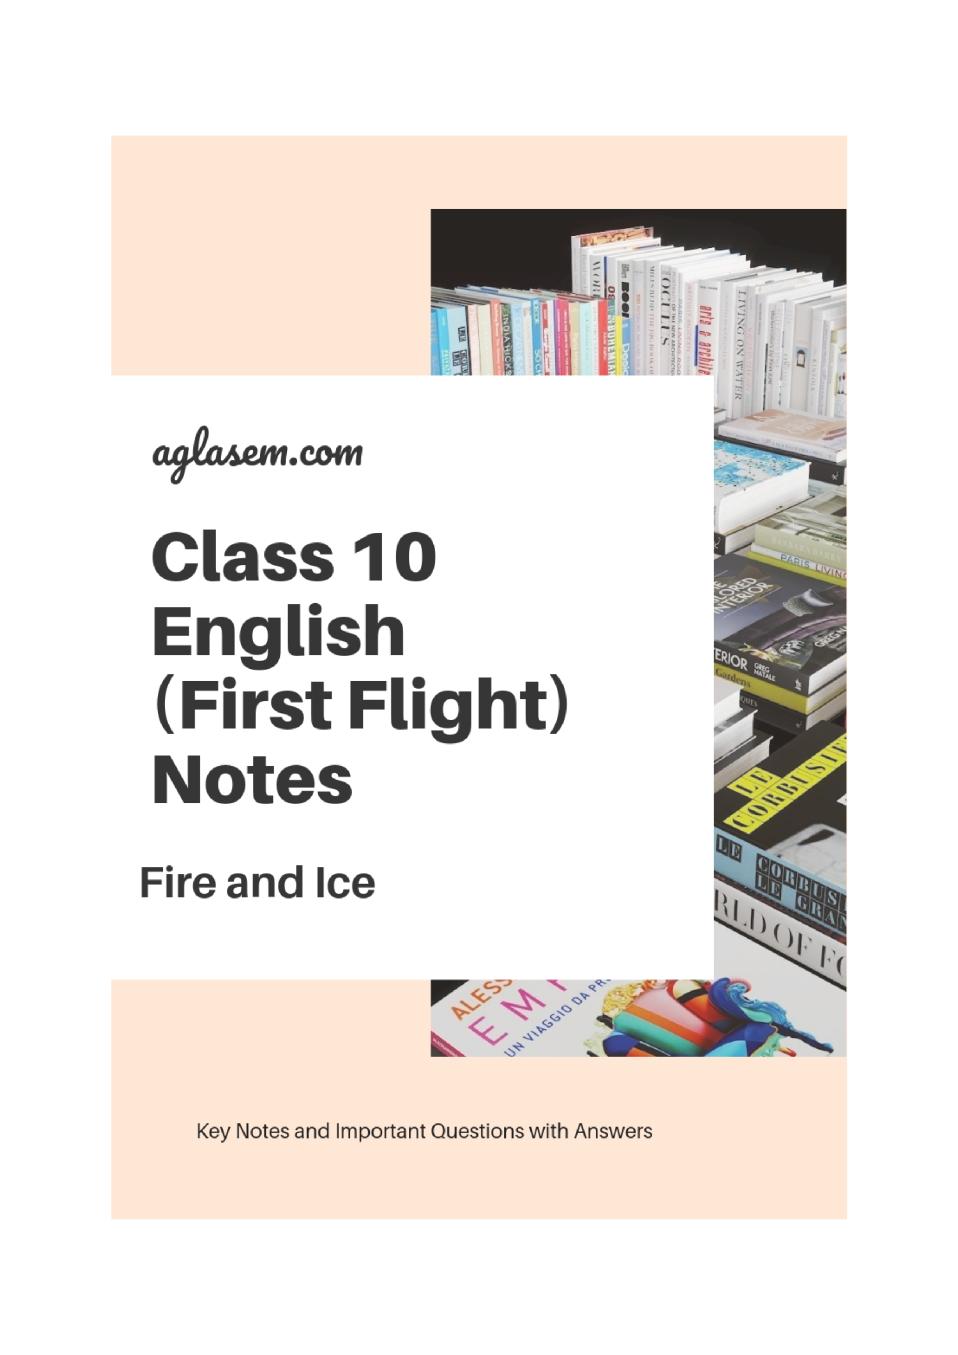 Class 10 English First Flight Notes For Fire and Ice - Page 1